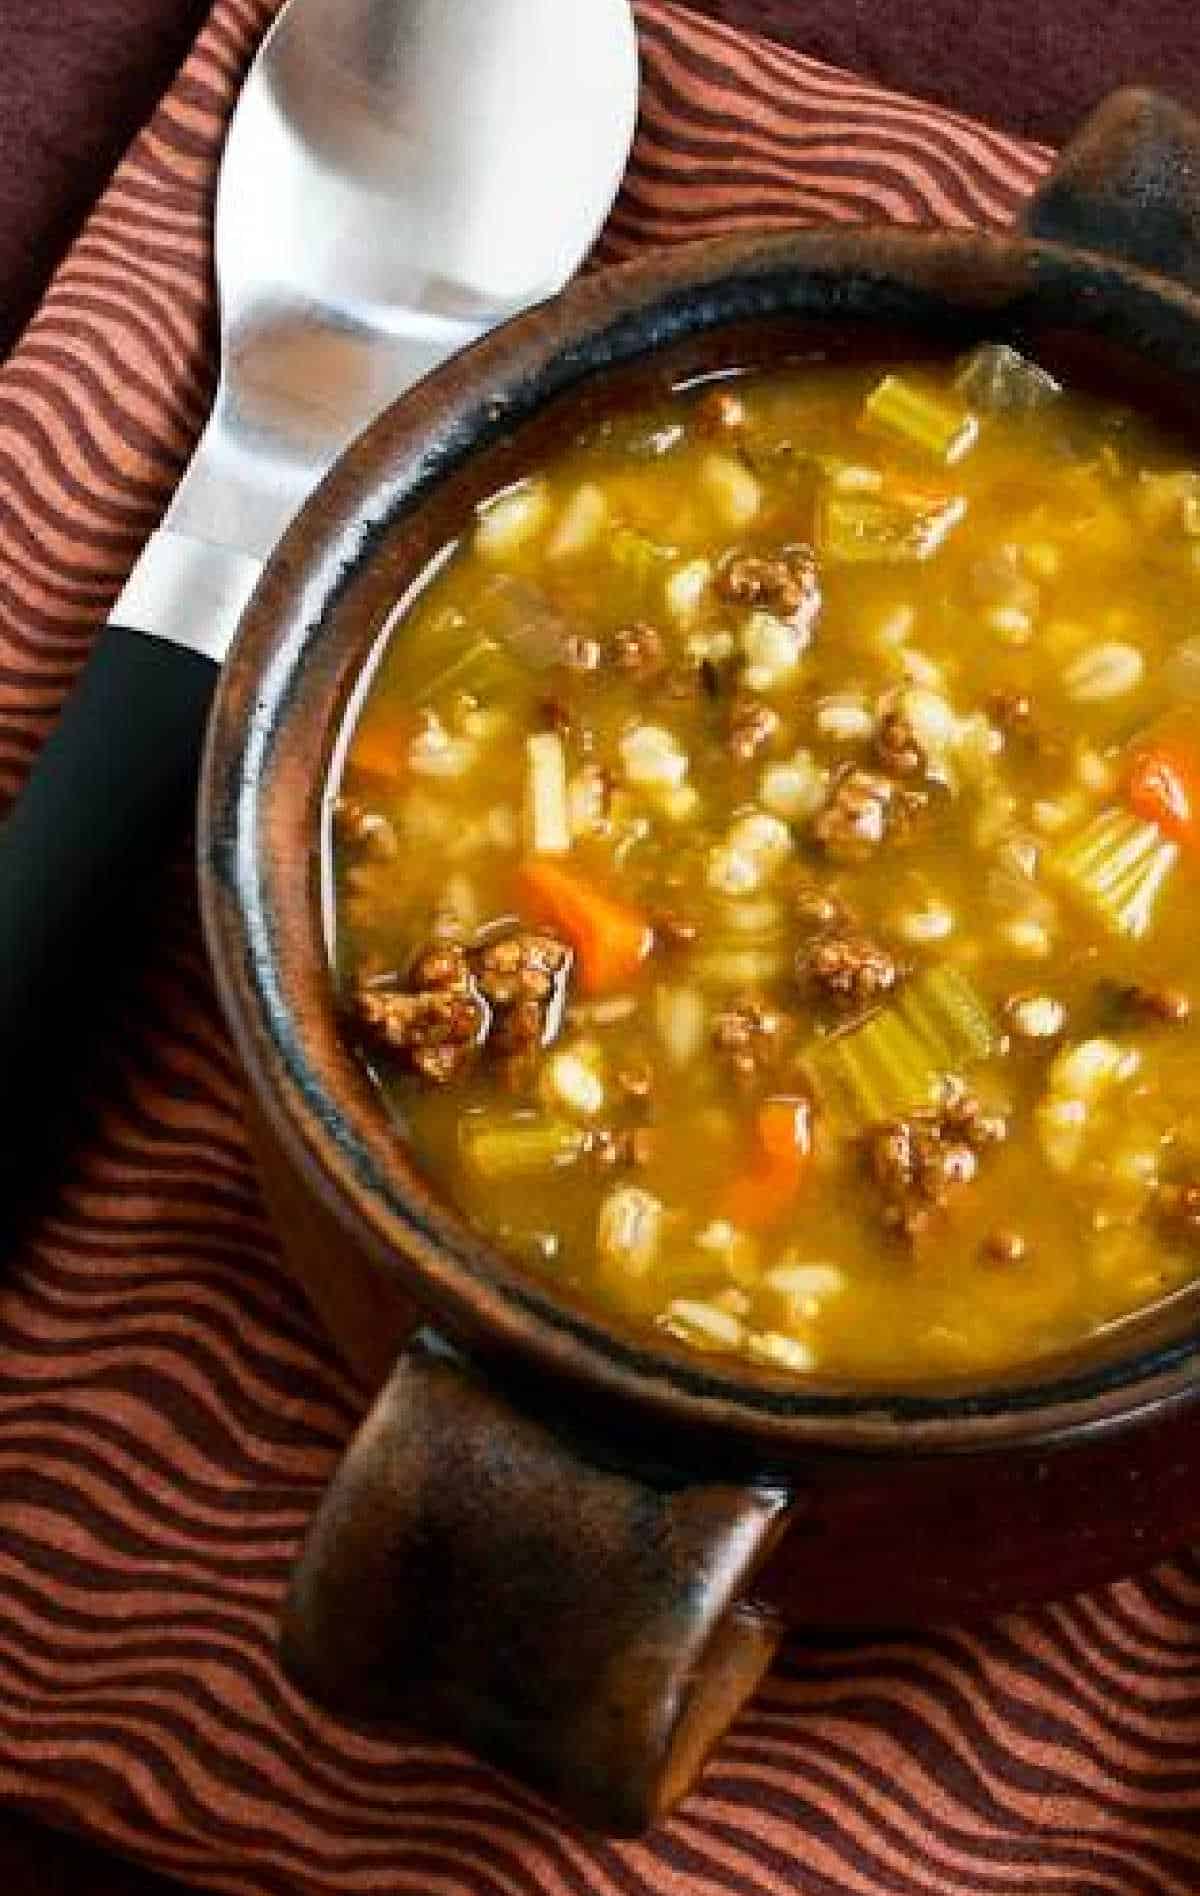 Ground Beef Barley Soup shown in brown soup bowl